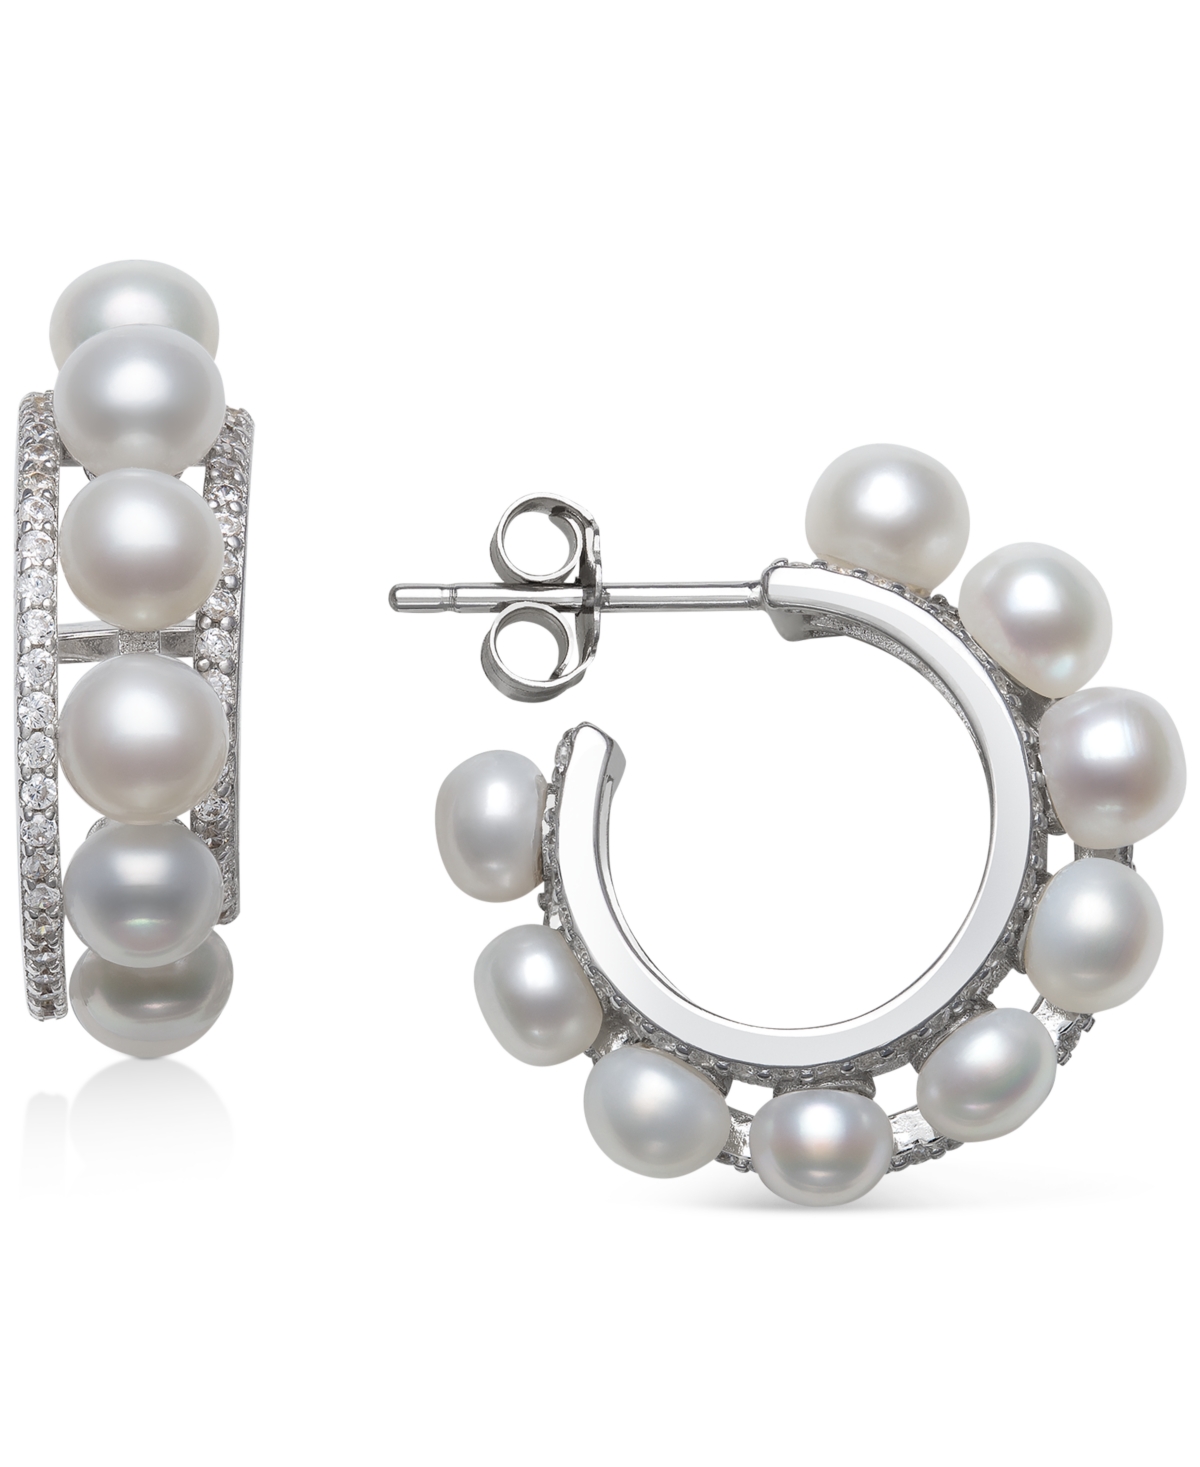 Cultured Freshwater Button Pearl (4mm) & Cubic Zirconia Small Hoop Earrings in Sterling Silver, Created for Macy's - Sterling Silver